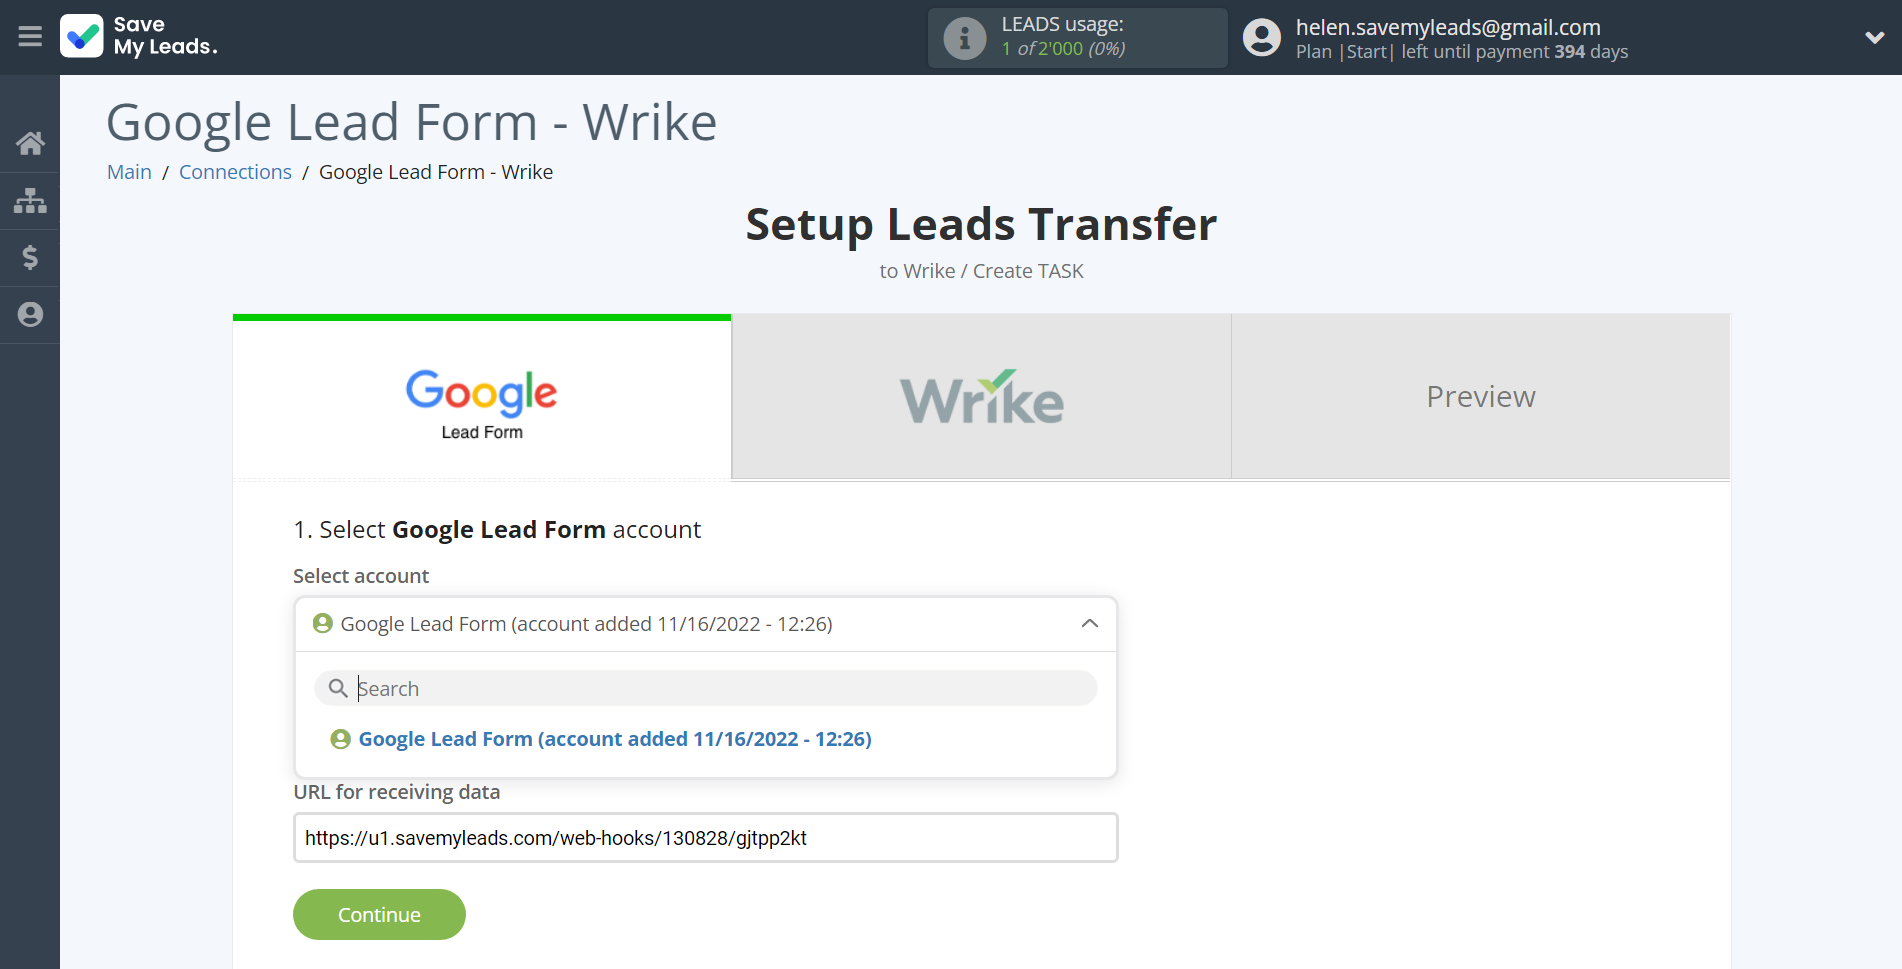 How to Connect Google Lead Form with Wrike | Data Source account selection